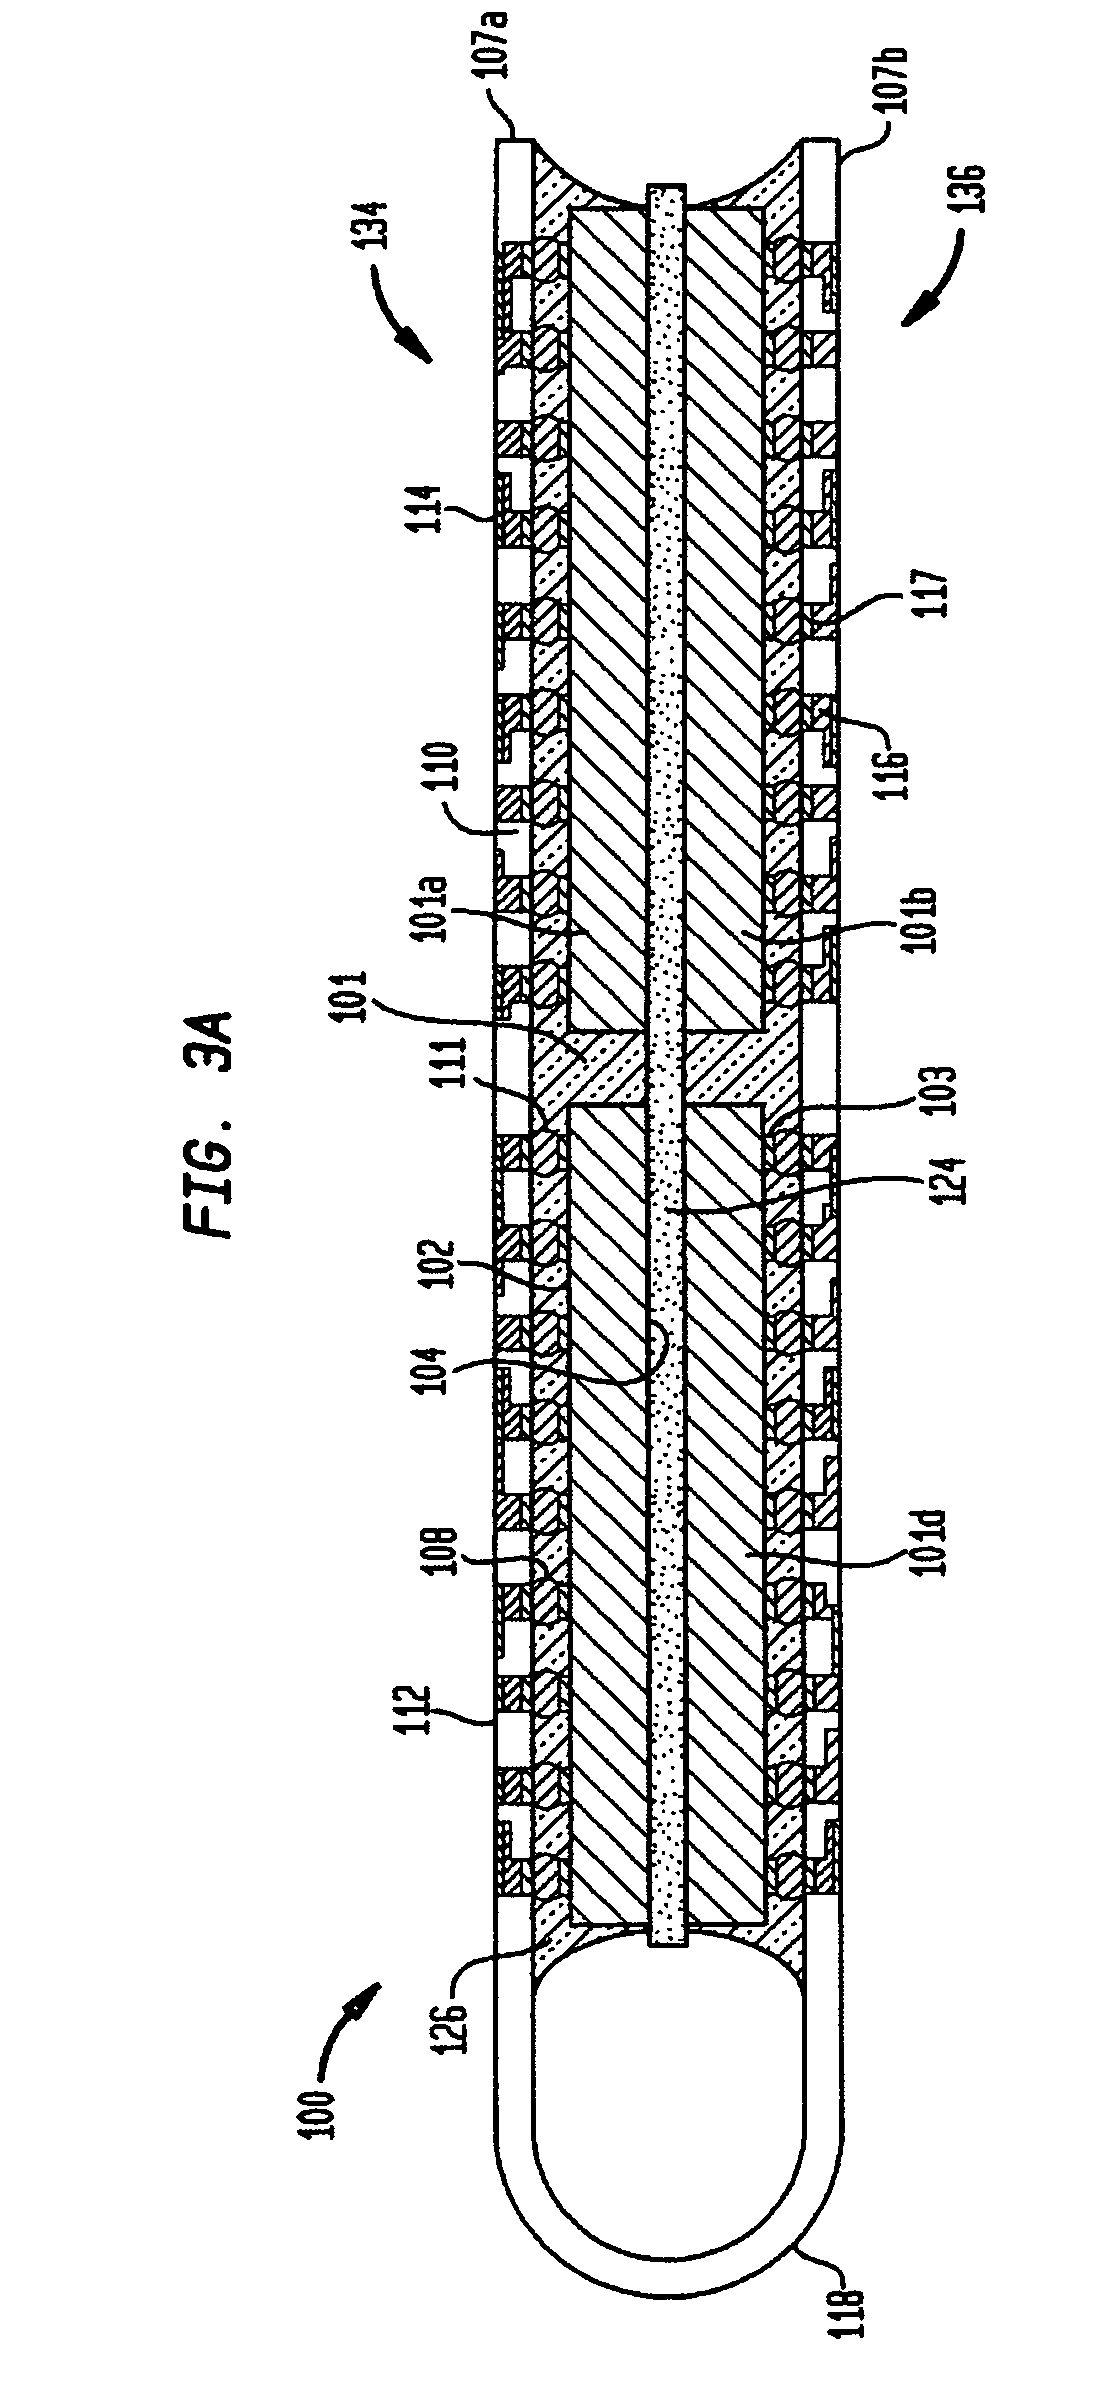 Stacked microelectronic assemblies